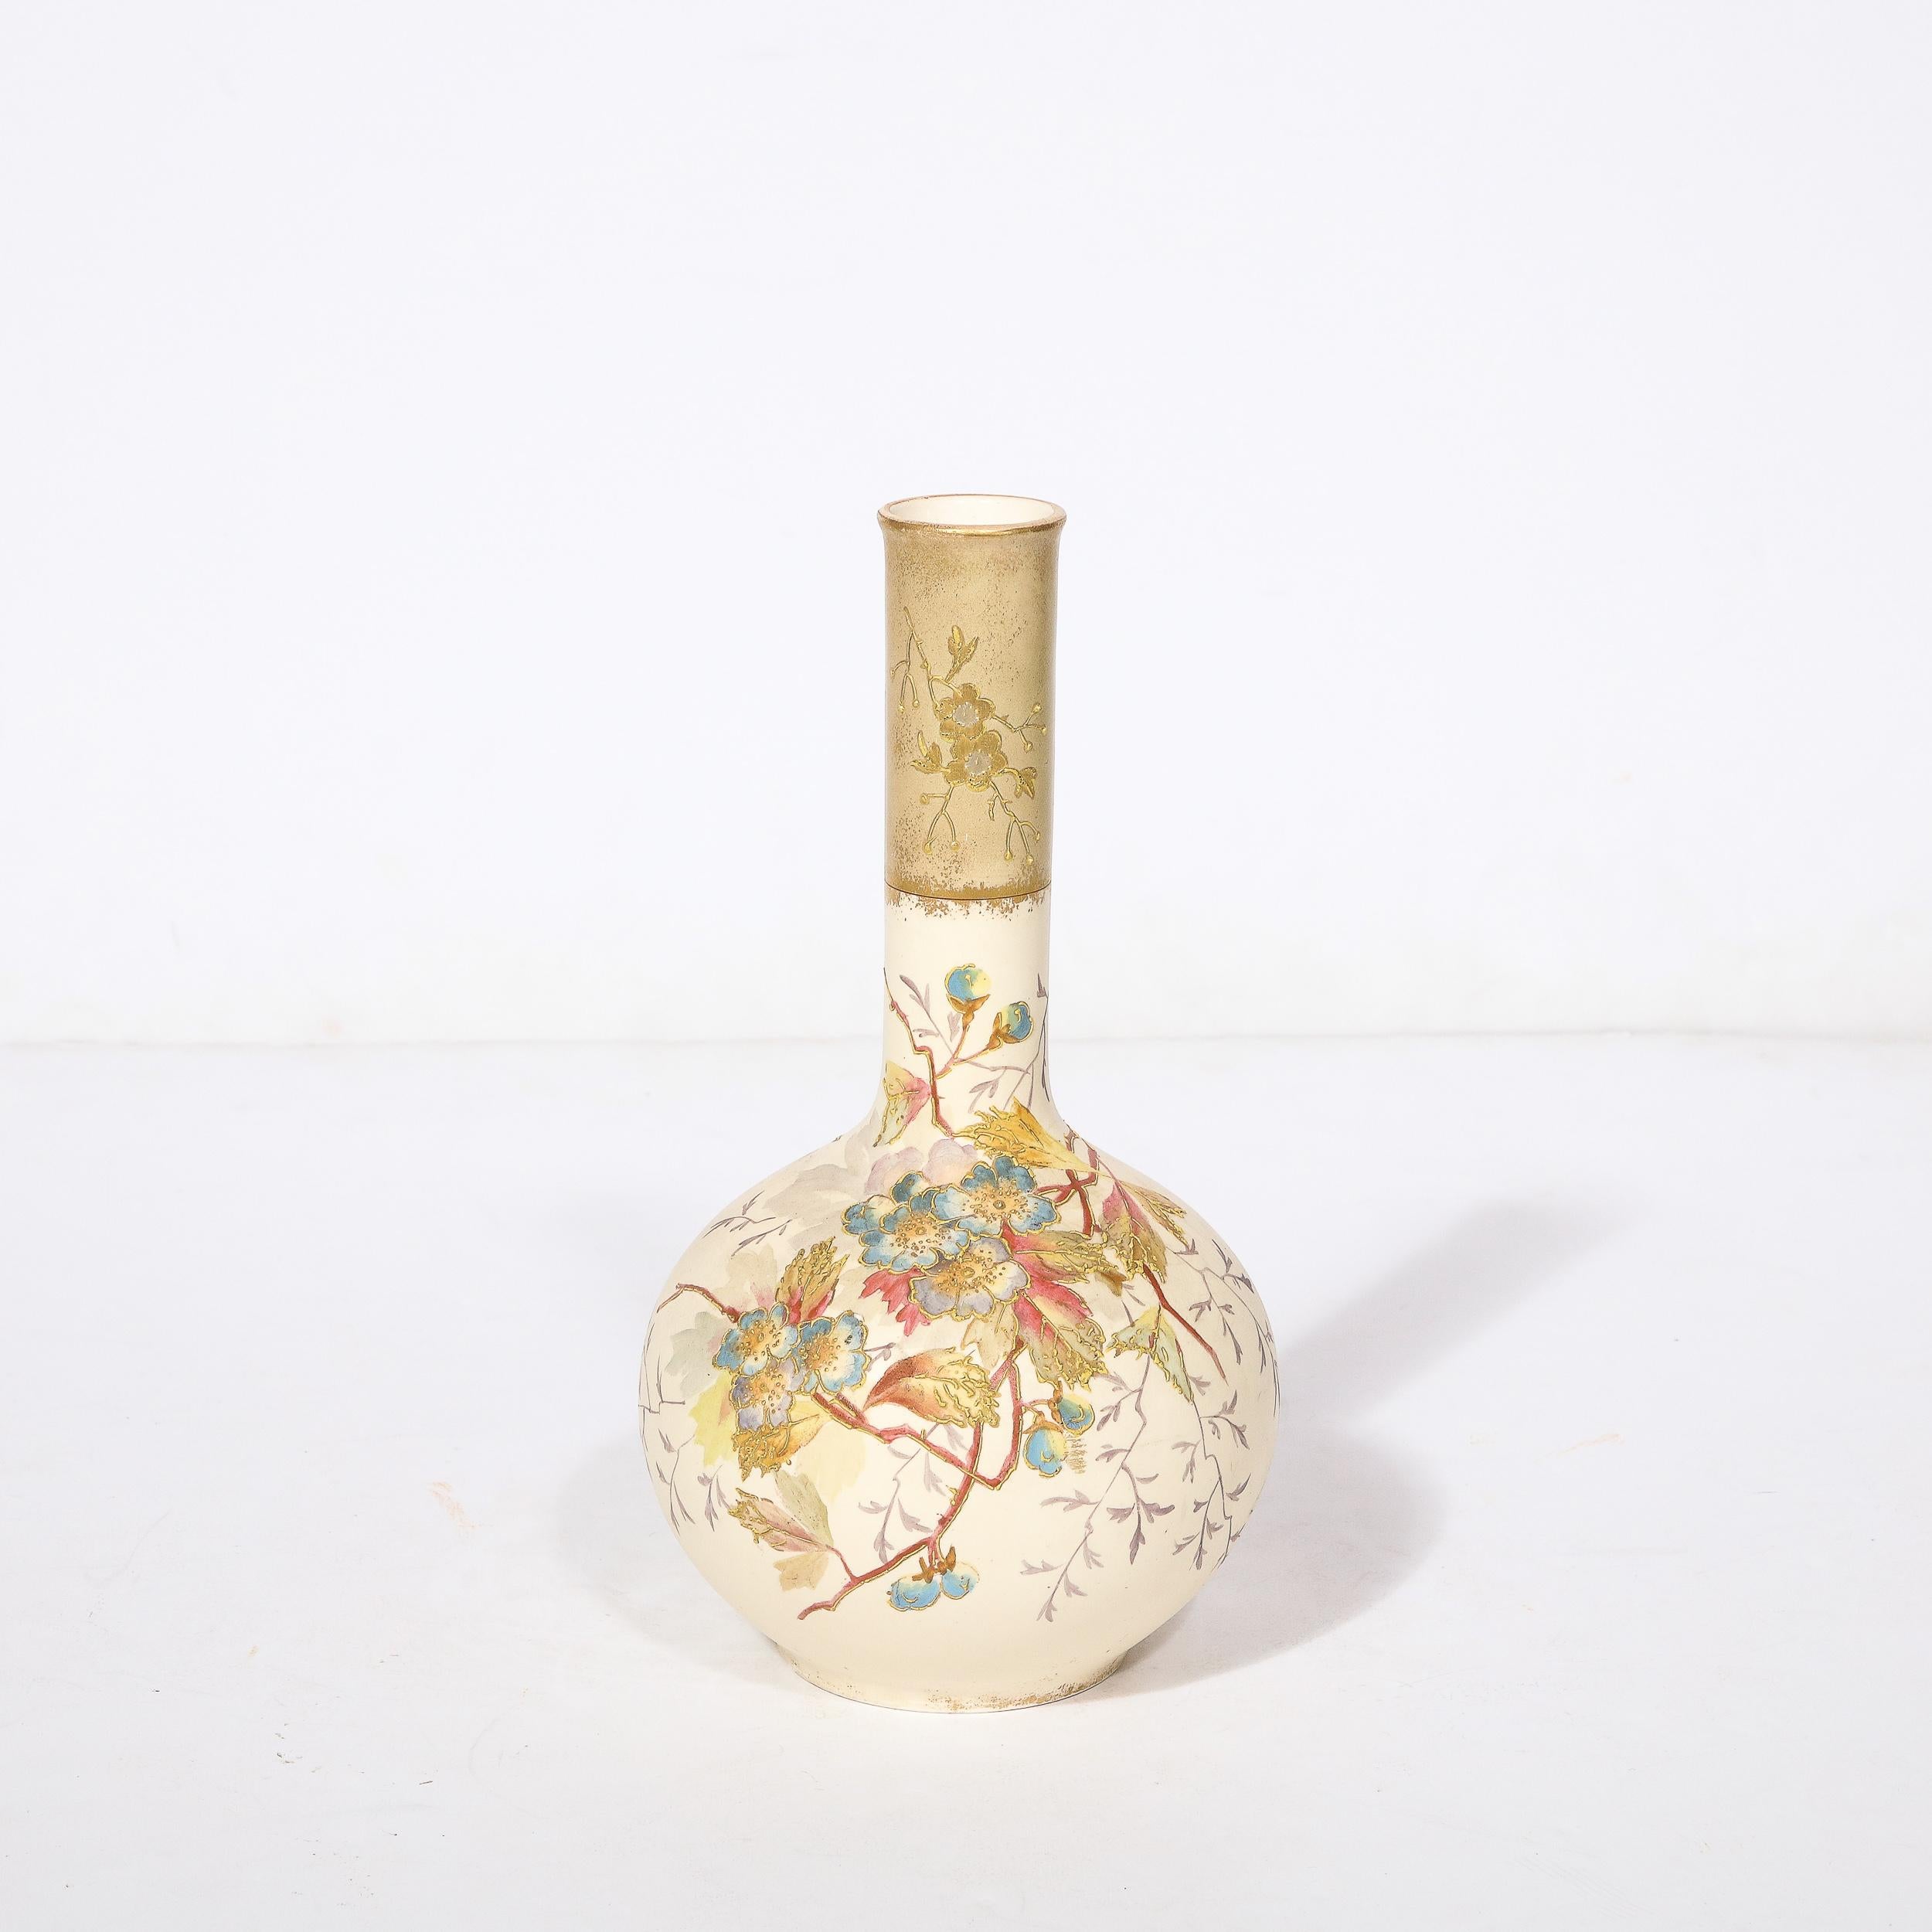 This elegant and well adorned Porcelain Bud Vase signed Royal Bonn by Franz Anton Mehlem originates from Germany, Circa 1900. Rendered in beautiful tones of bone white and gilded ceramic with lovely hand-painted naturalist motifs and detailing, this